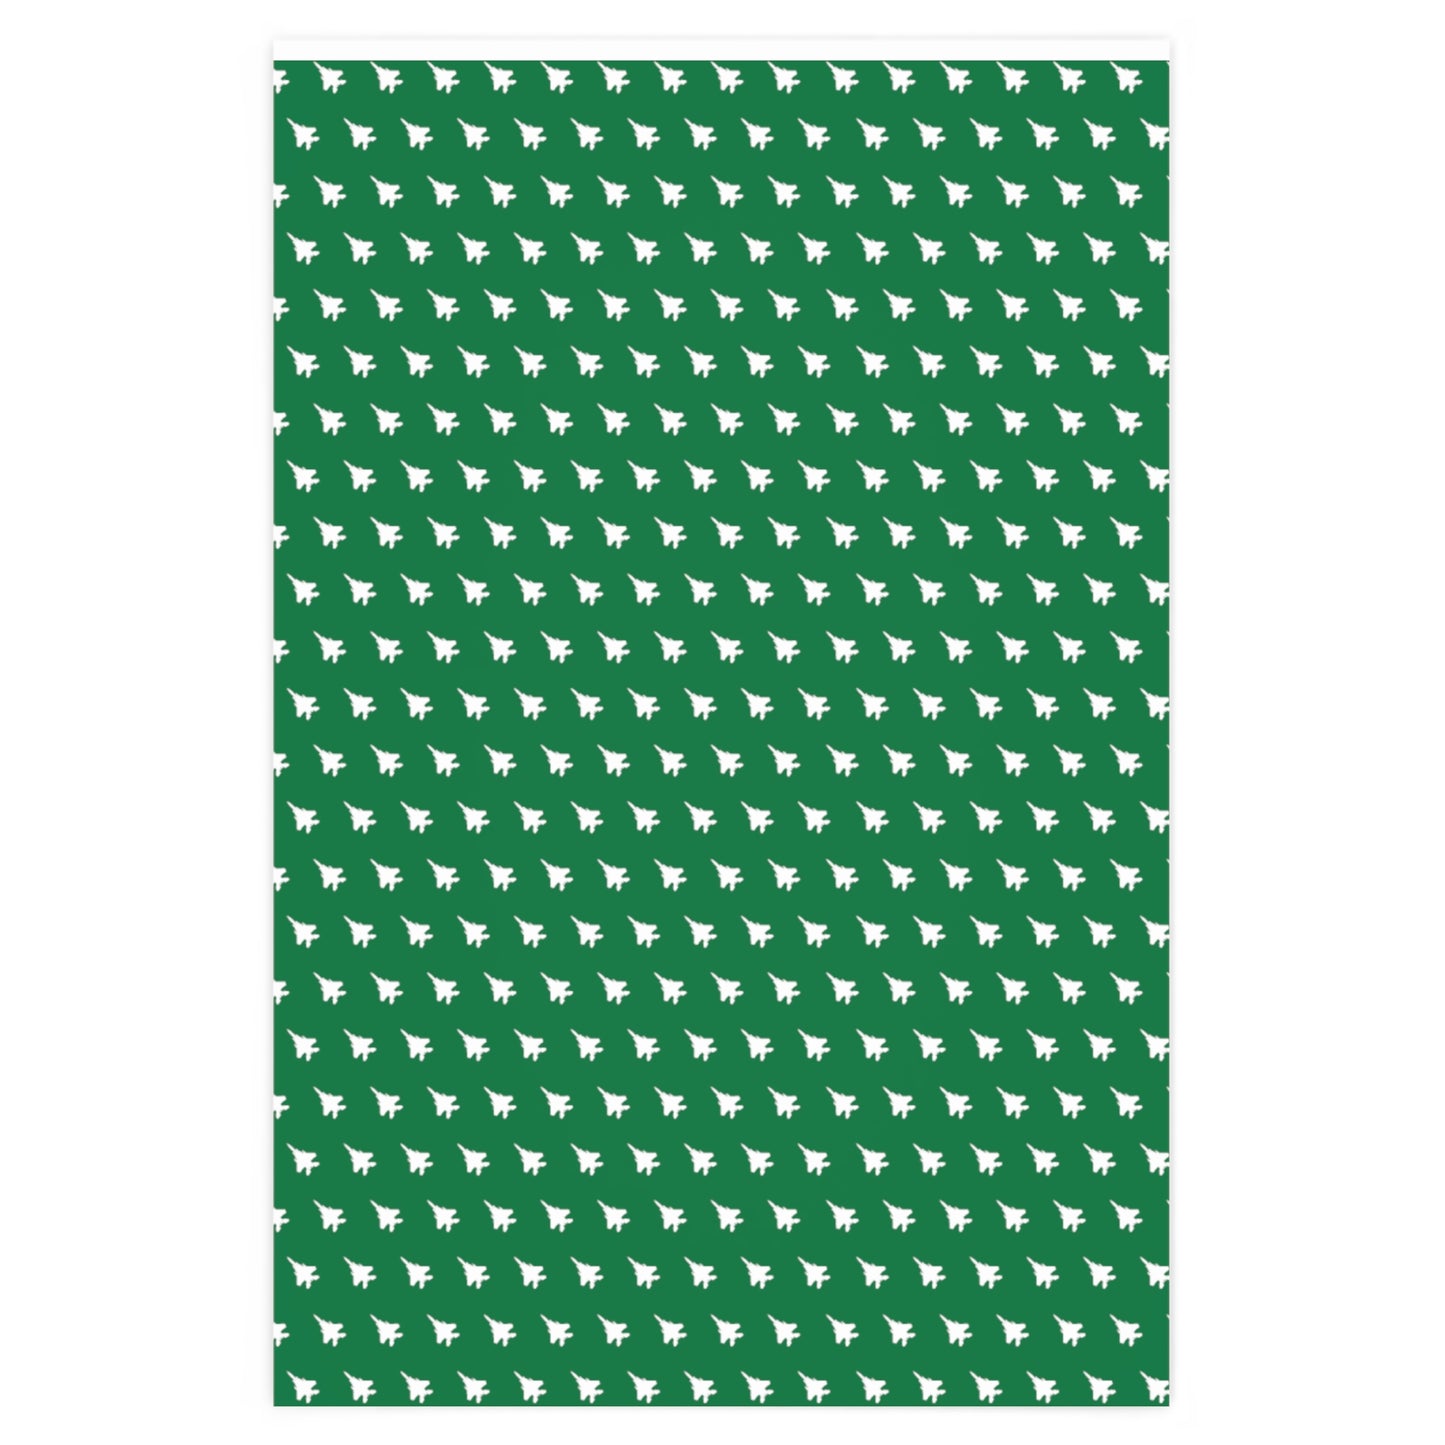 F-15 Wrapping Paper, Green